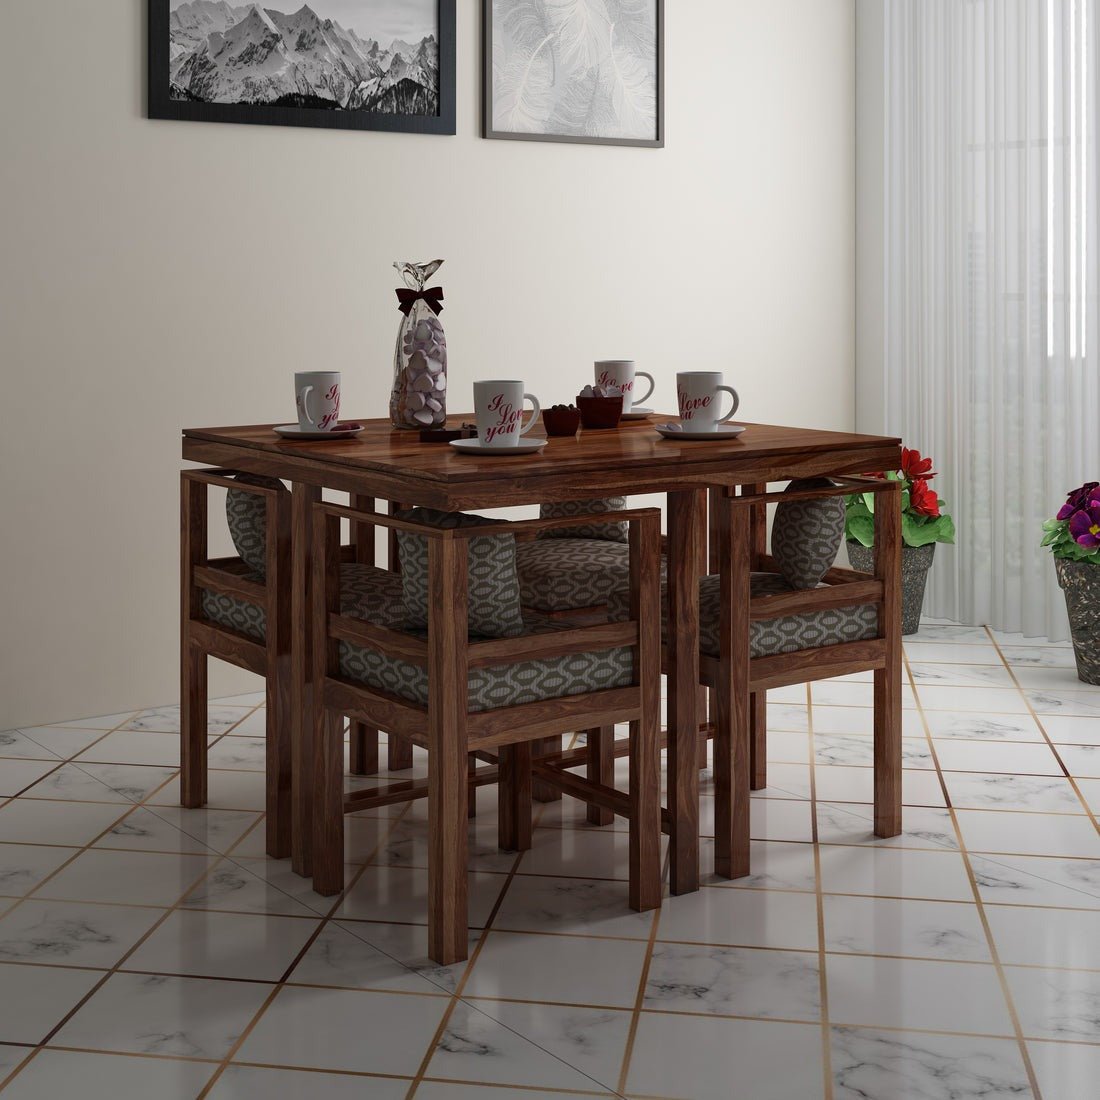 Jeff Wooden Square Dining Table Sets with 4 Cushioned Chairs - Torque India